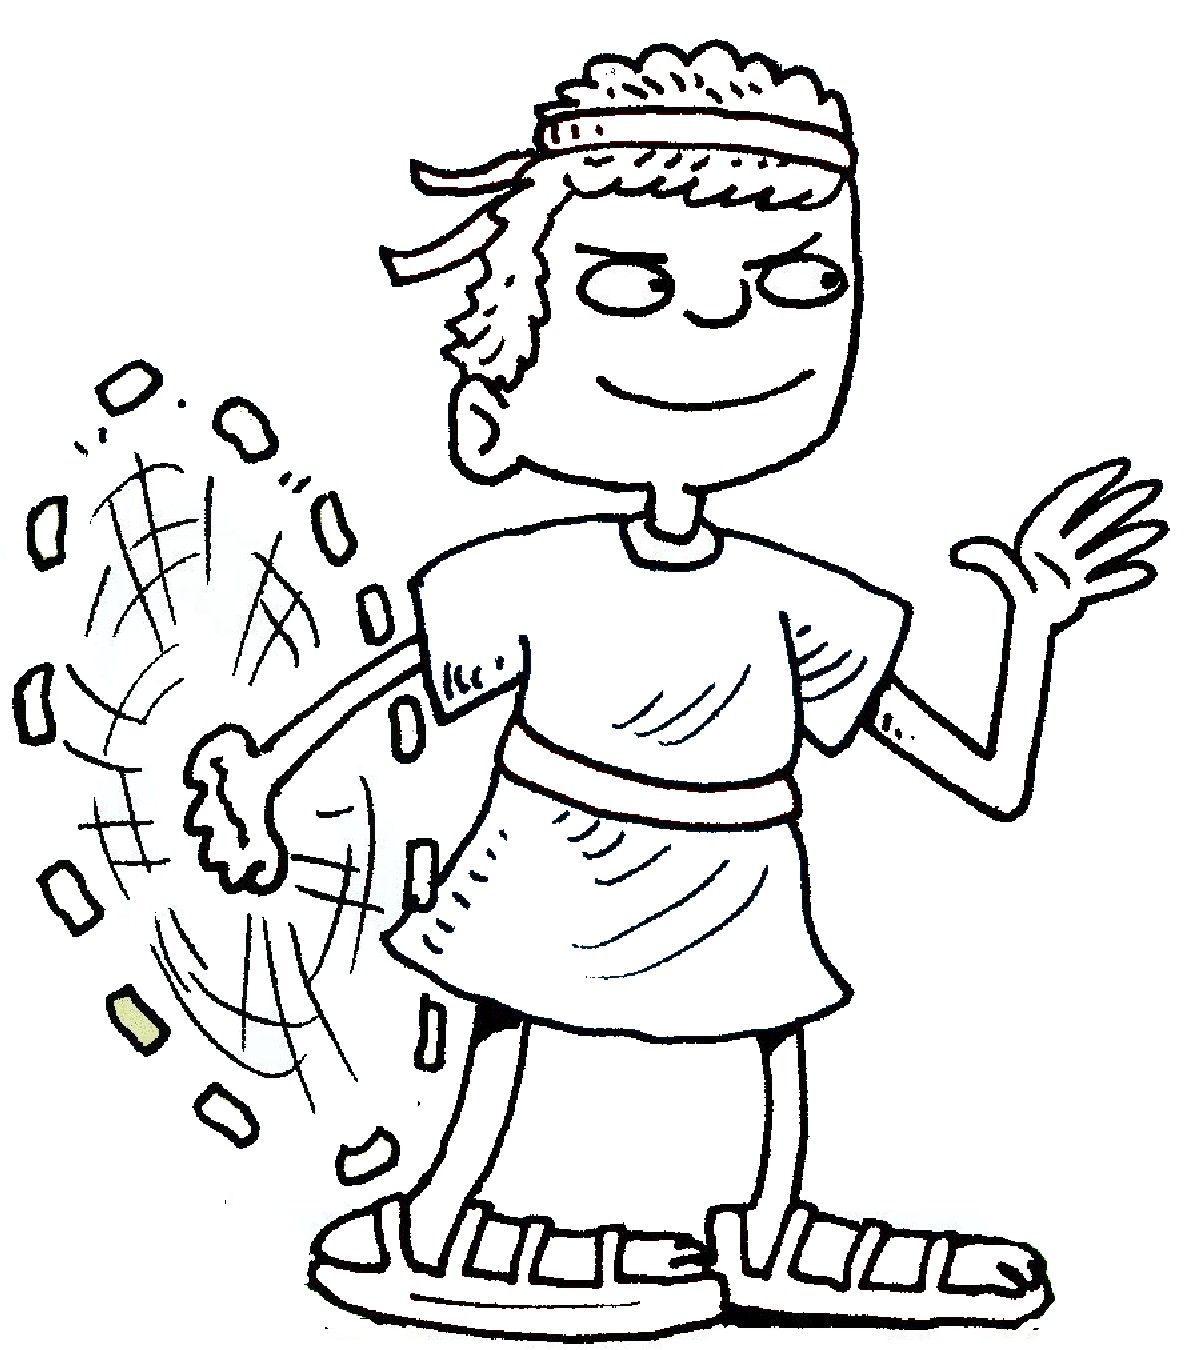 david and goliath coloring pages and activities - photo #21